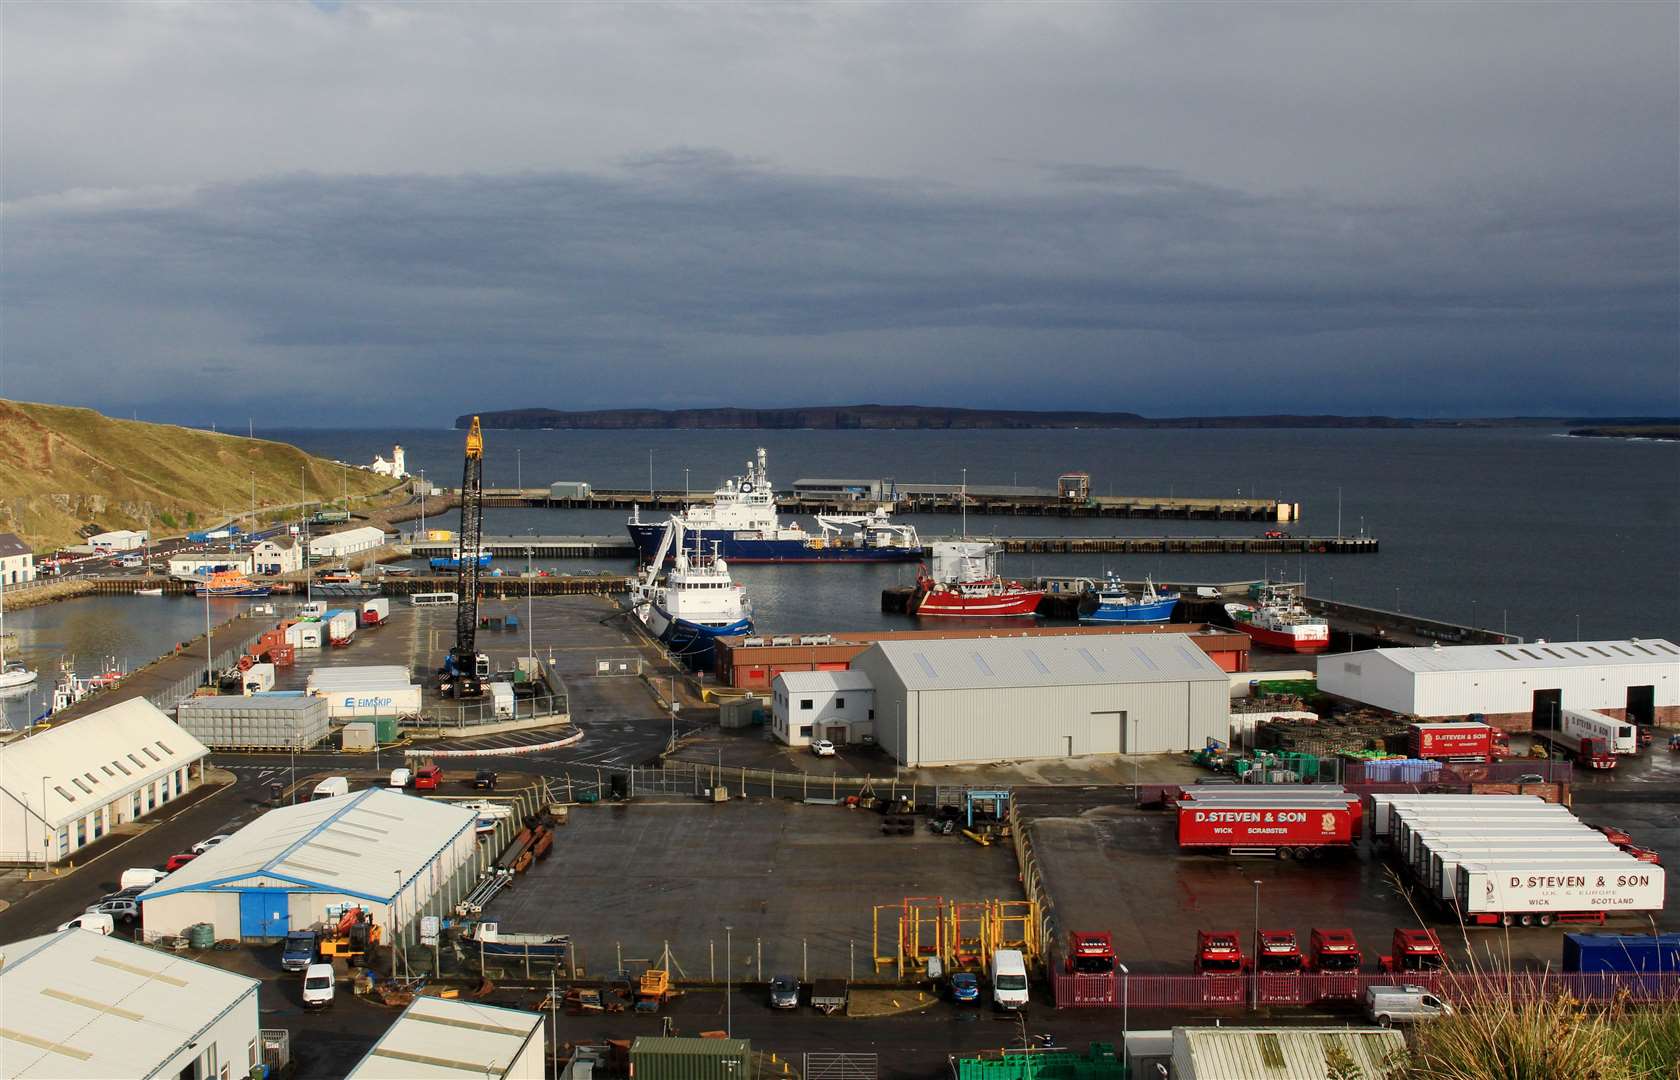 The value of fish landings at Scrabster harbour was the third highest in Scotland last year.